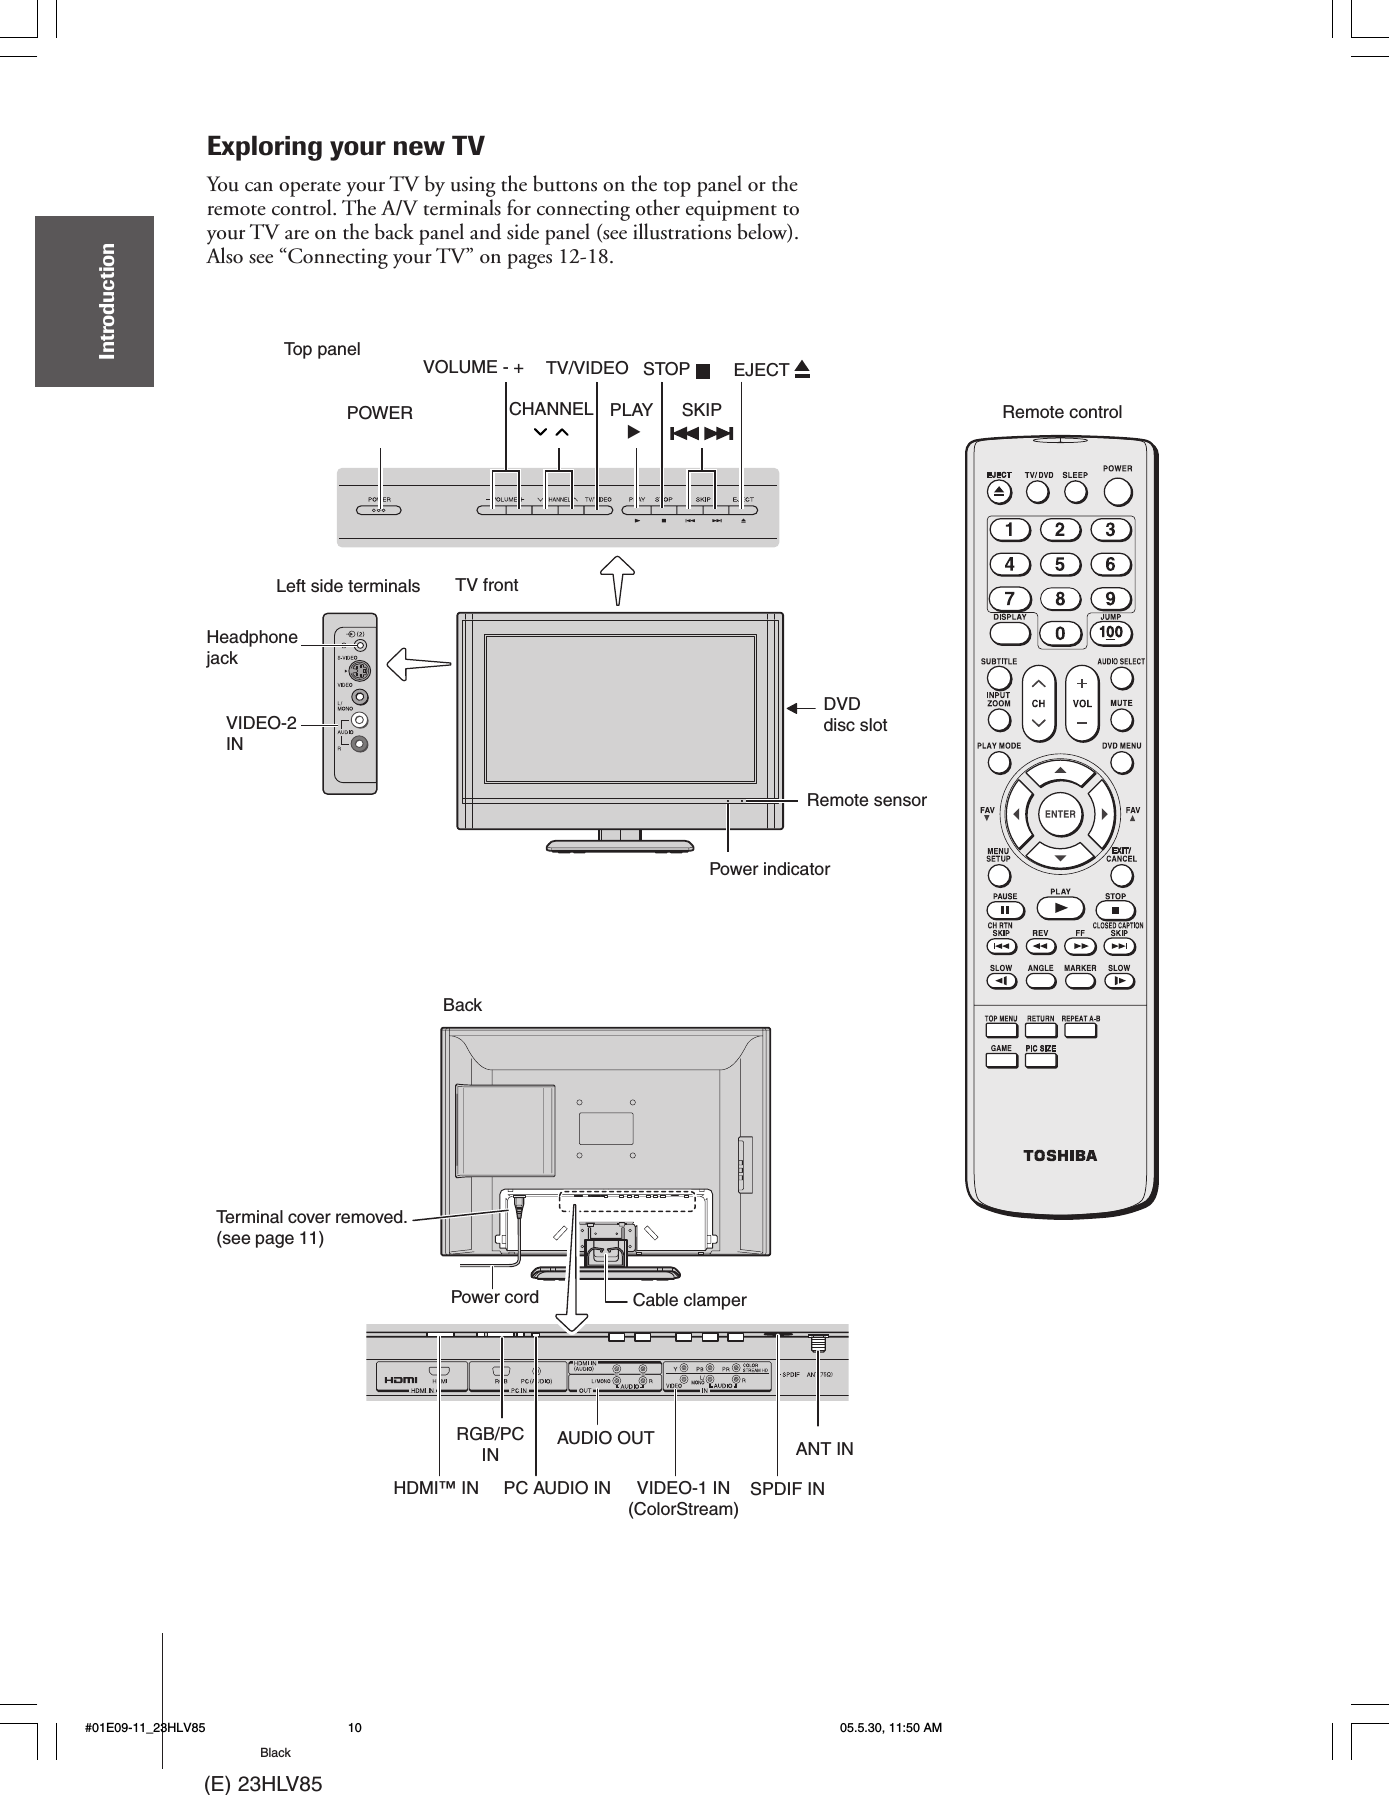 (E) 23HLV85IntroductionBackTV frontVOLUME - +CHANNEL Remote sensorRemote controlVIDEO-2INTV/VIDEOHeadphonejackPower indicatorANT INAUDIO OUTPower cordPOWERTop panelLeft side terminalsTe r minal cover removed.(see page 11)Exploring your new TVYou can operate your TV by using the buttons on the top panel or theremote control. The A/V terminals for connecting other equipment toyour TV are on the back panel and side panel (see illustrations below).Also see “Connecting your TV” on pages 12-18.VIDEO-1 IN(ColorStream)RGB/PCINPC AUDIO INCable clamperDVDdisc slotHDMI™ INPLAY •STOP SKIP EJECT SPDIF IN#01E09-11_23HLV85 05.5.30, 11:50 AM10Black